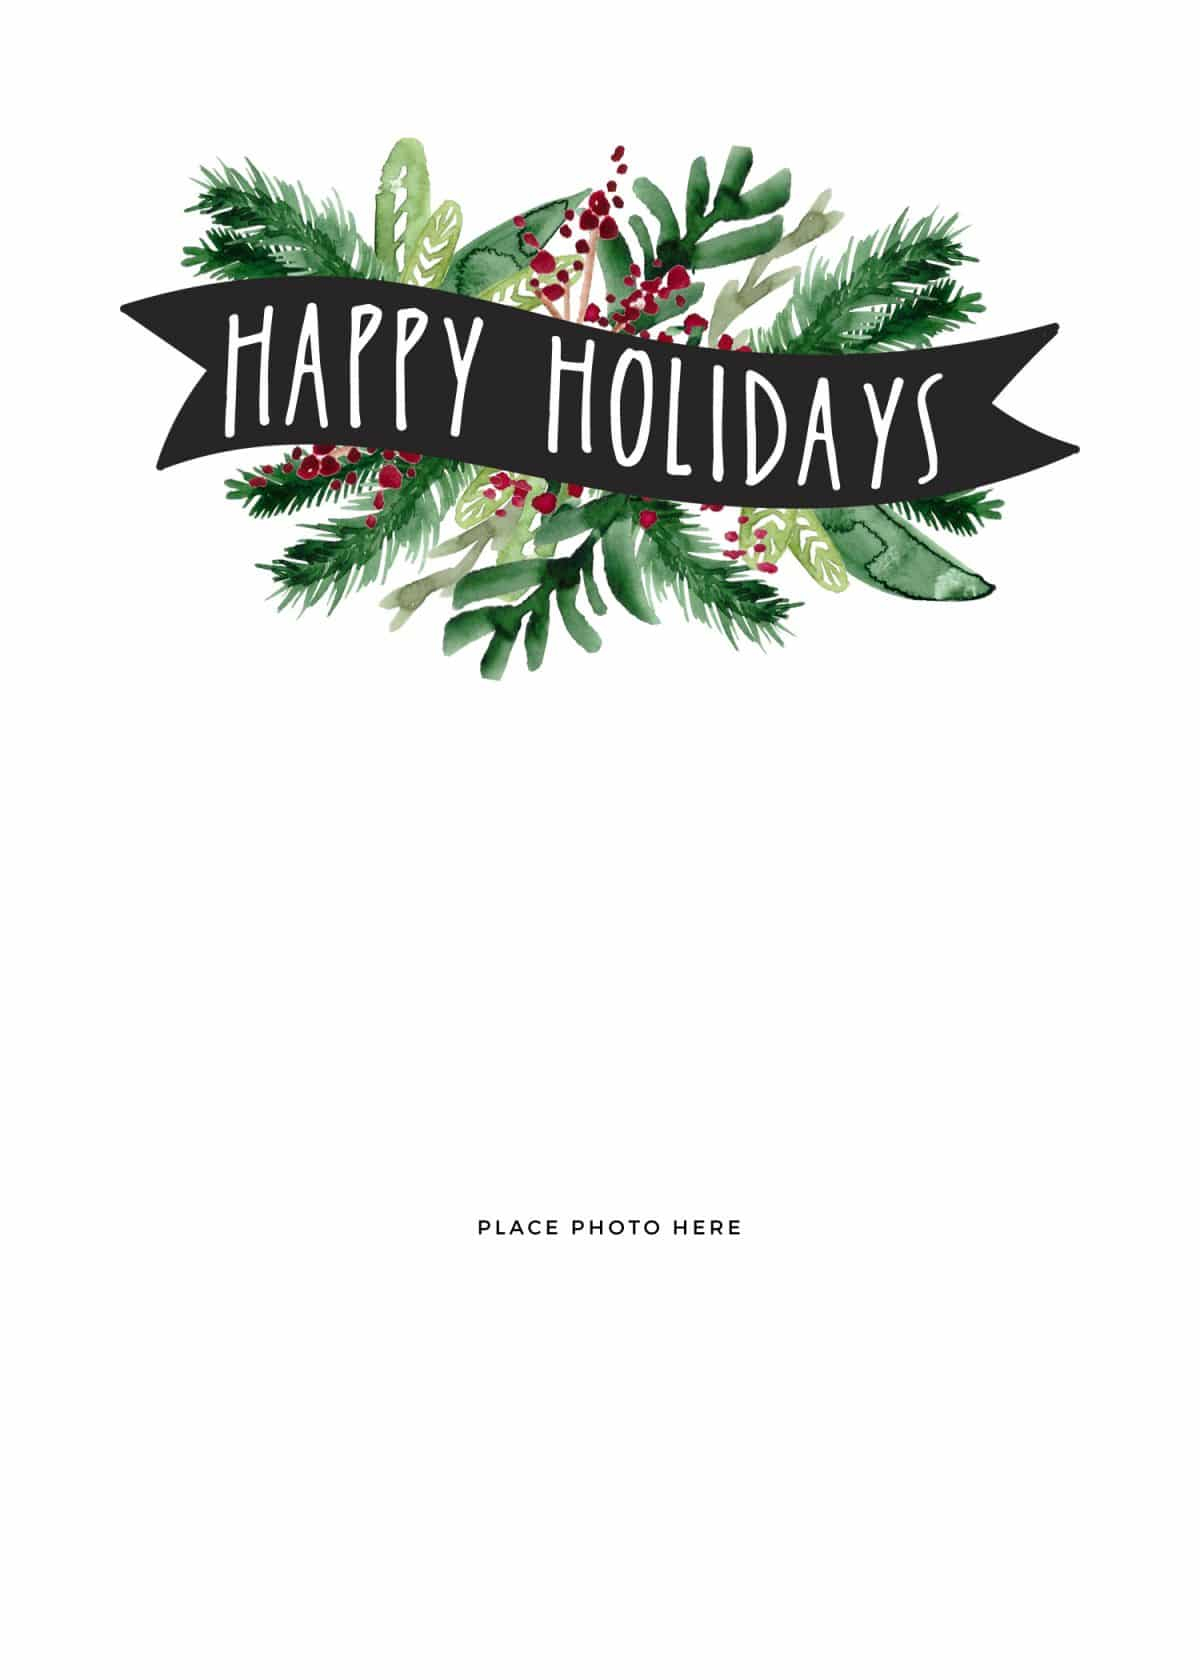 Make Your Own Photo Christmas Cards (For Free!) - Somewhat Simple - Free Online Printable Christmas Cards